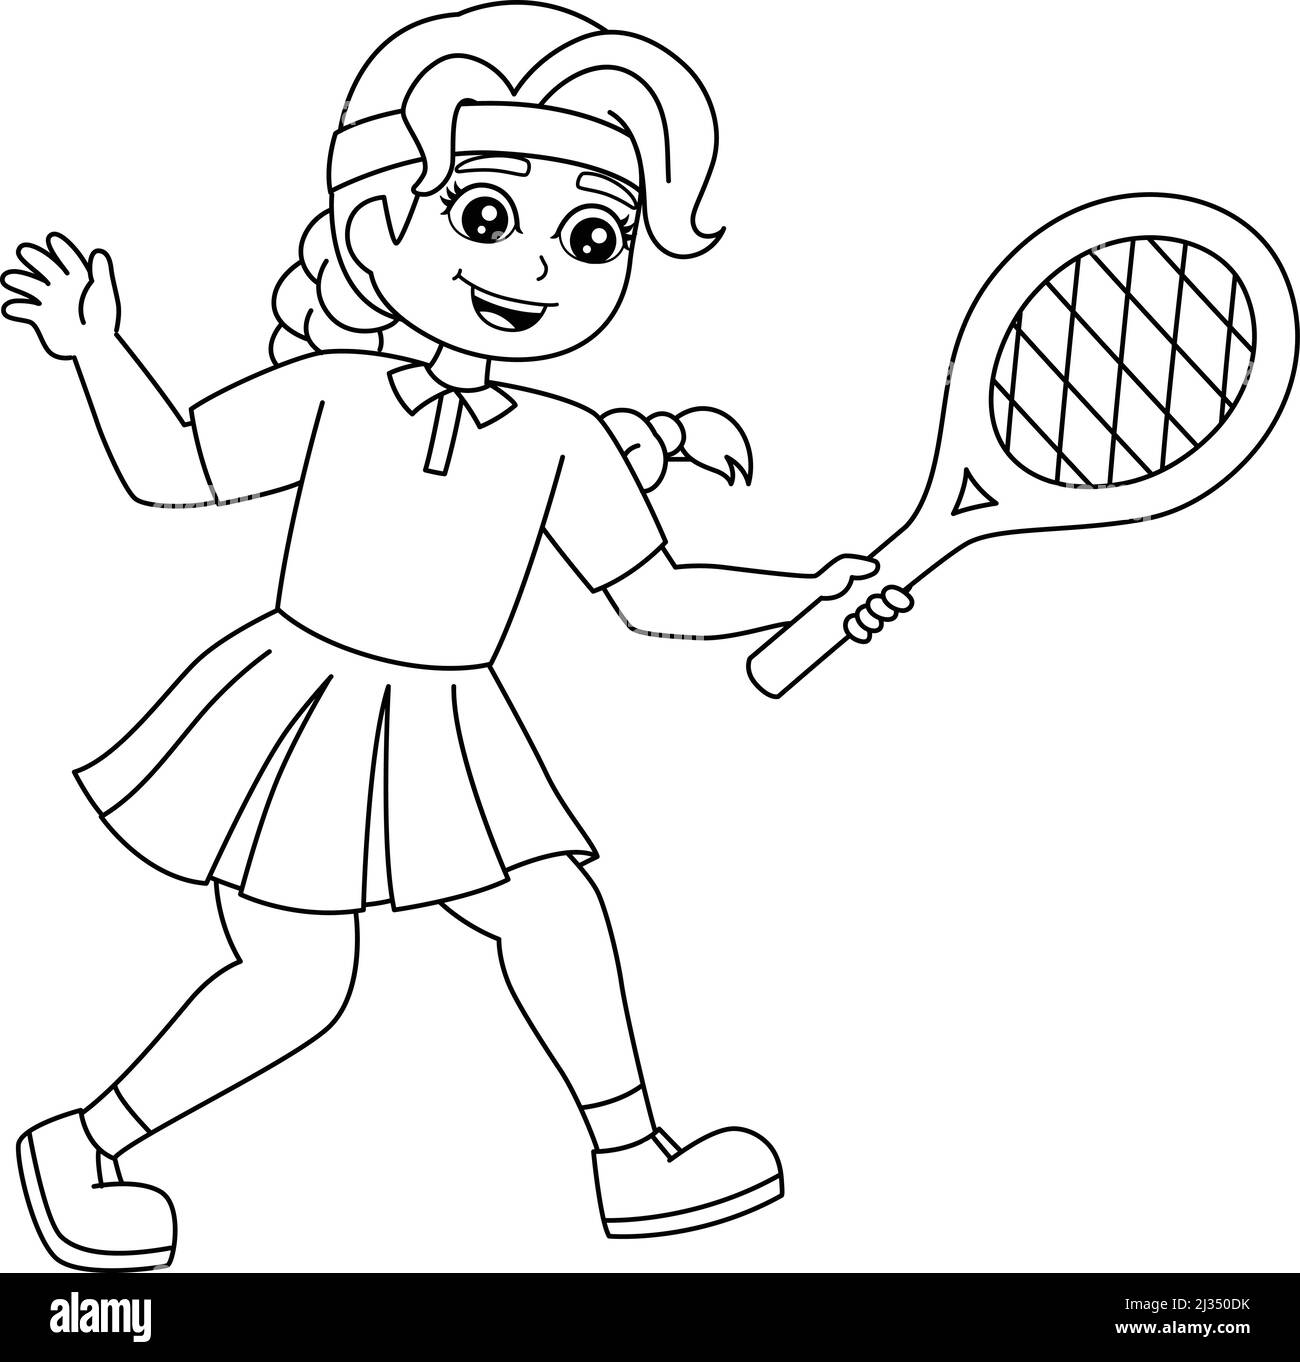 Girl Playing Tennis Coloring Page Isolated Stock Vector Image & Art - Alamy